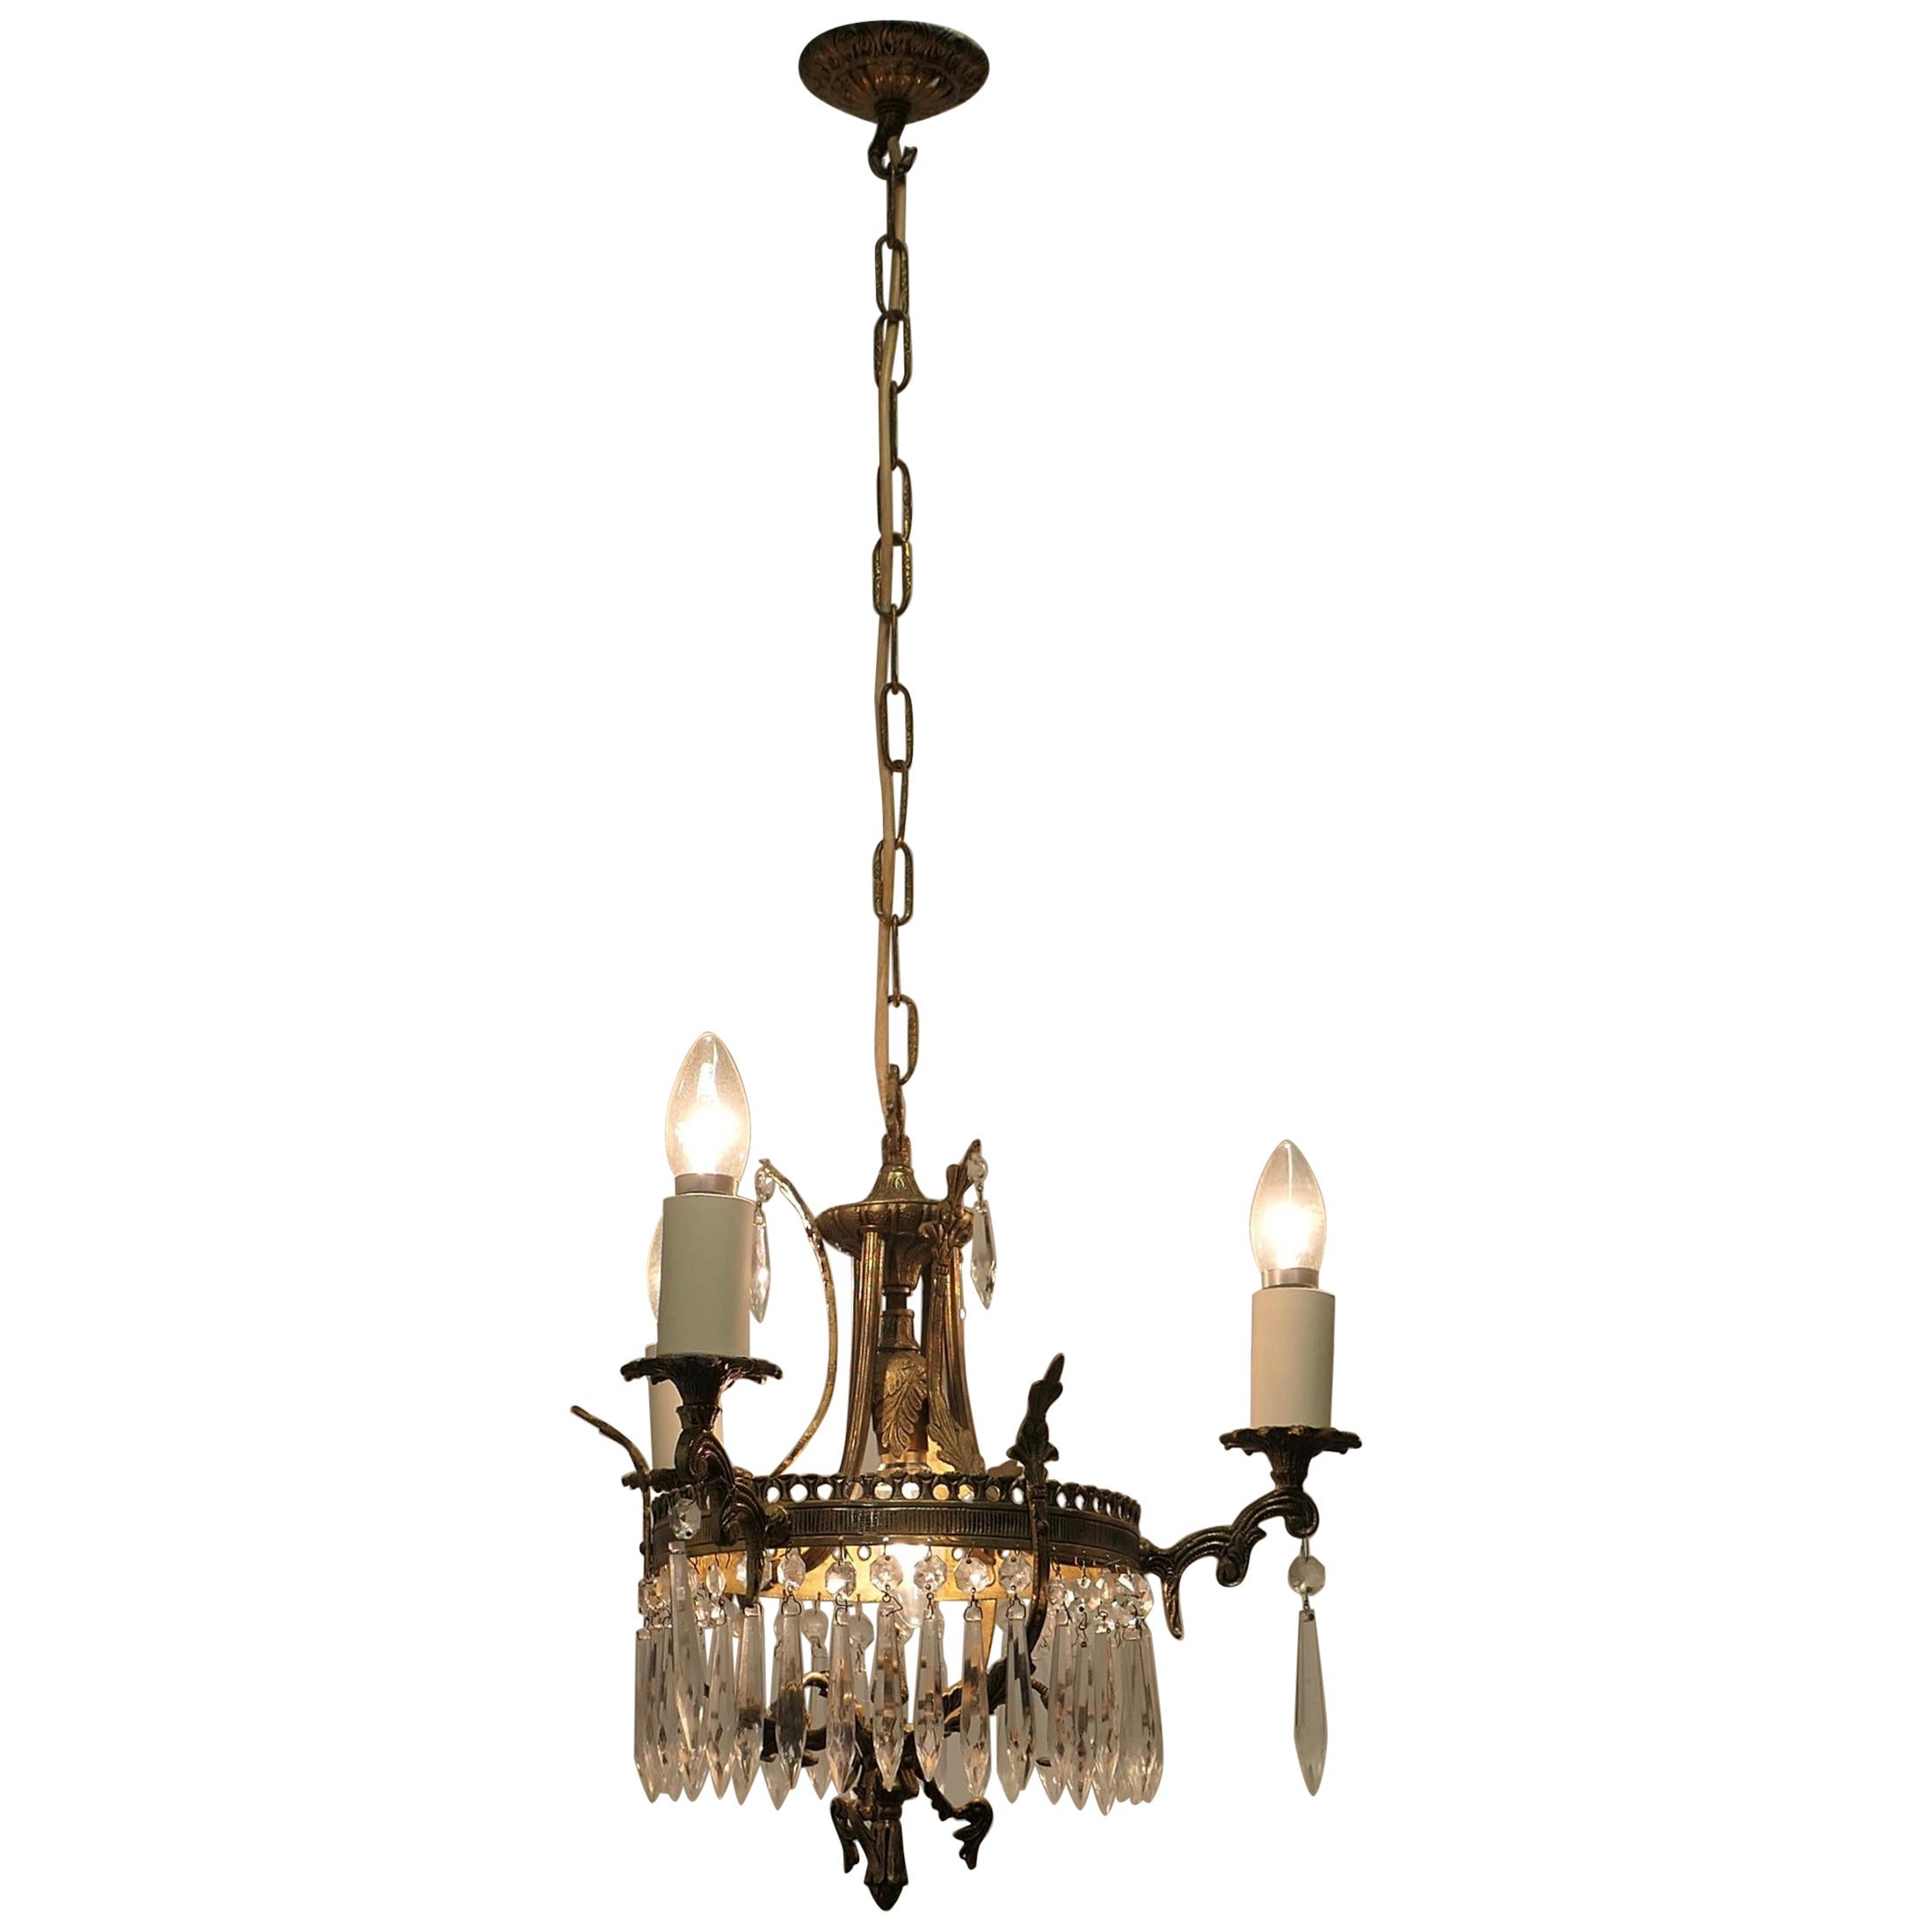 A Stunning 3 Branch Brass and Crystal Chandelier   This is excellent quality  For Sale